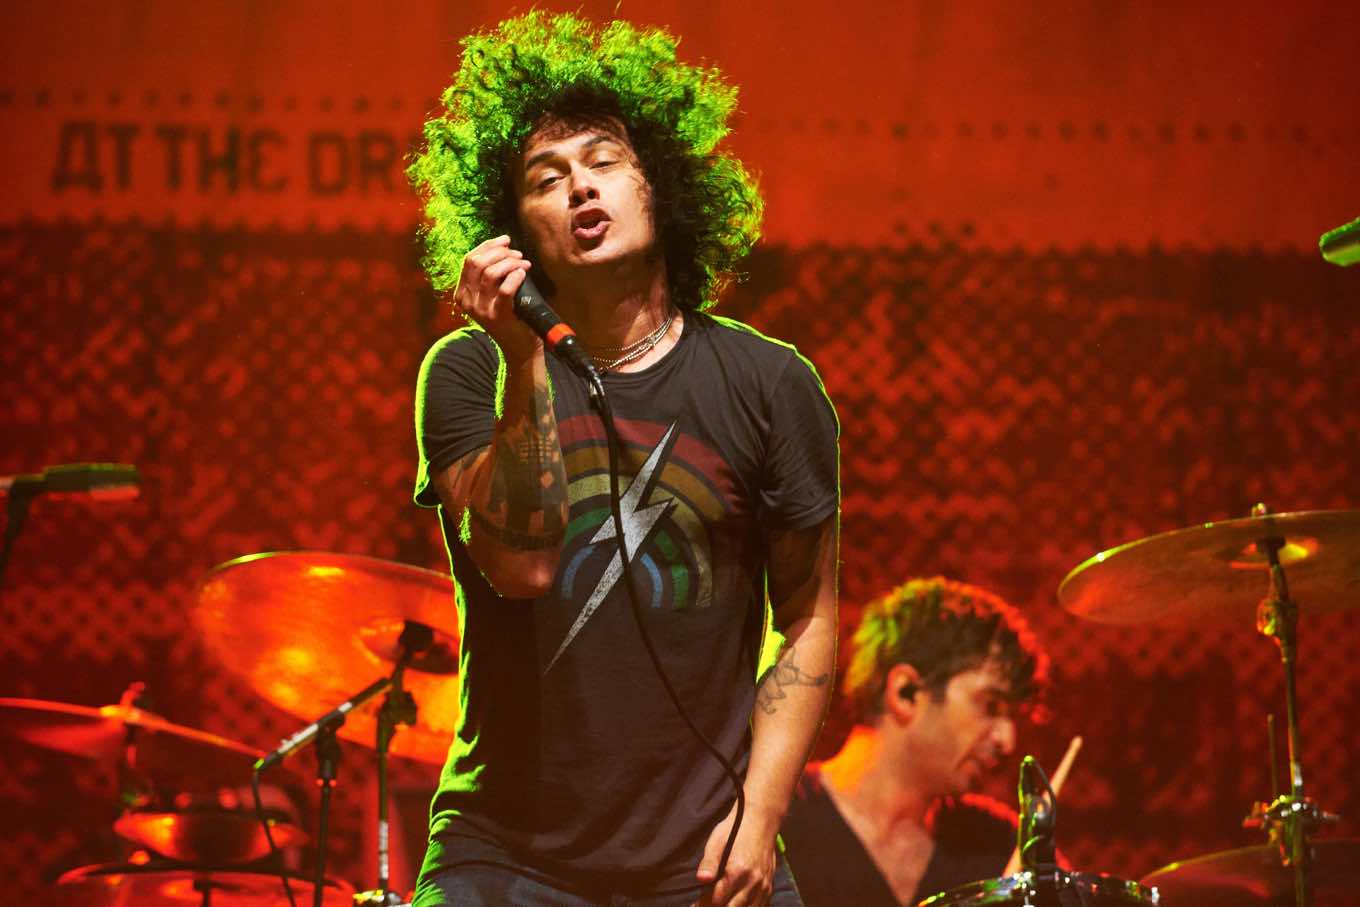 Cedric Bixler-Zavala of At the Drive-In performs on stage during the final day of Leeds Festival at Bramham Park on August 26, 2012 in Leeds, United Kingdom. (Photo by: Gary Wolstenholme/Getty)